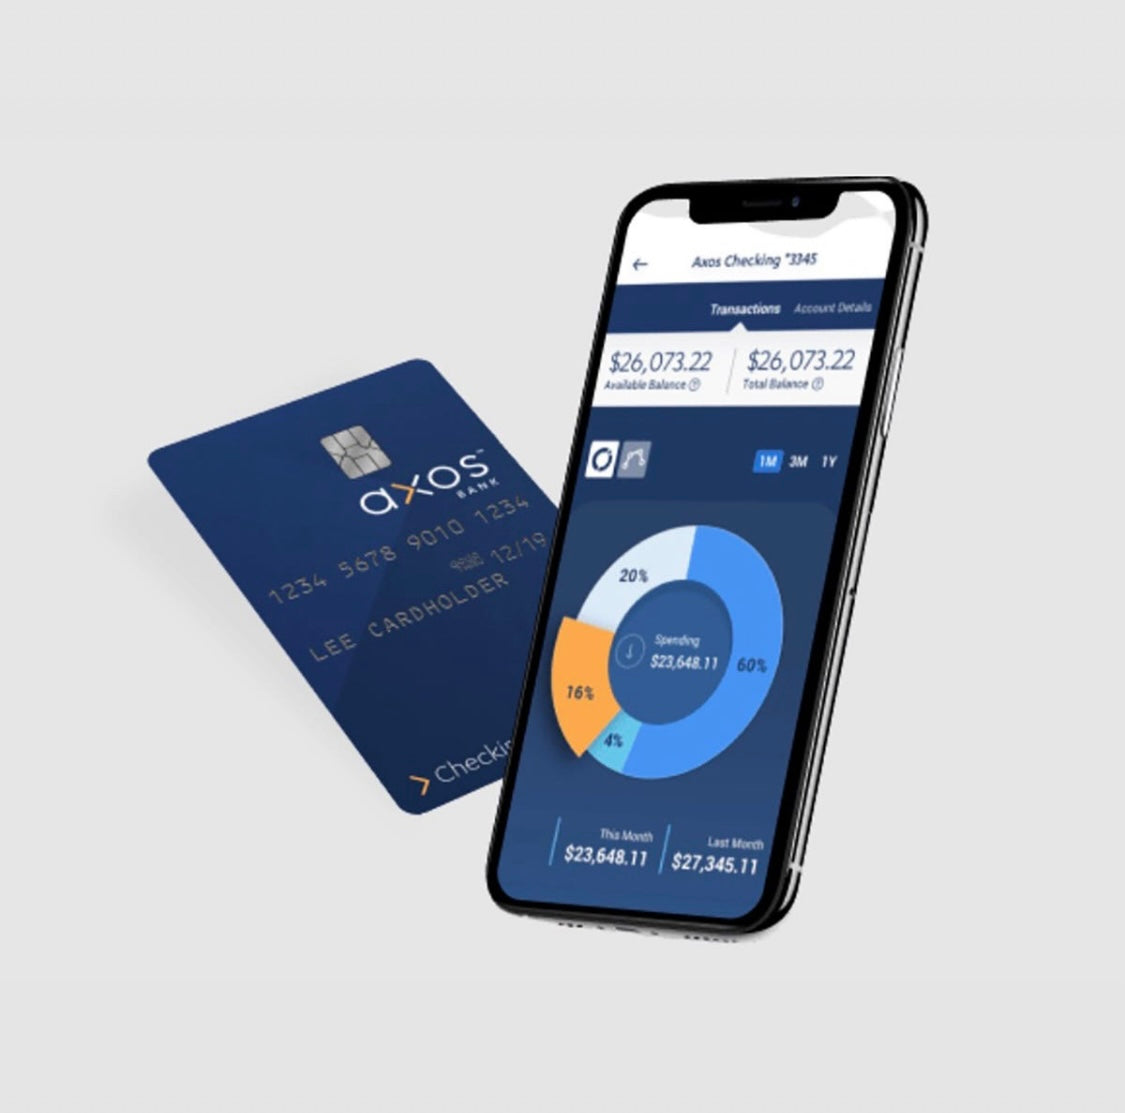 AXOS US Bank account opening, no account management fees, no transfer fees, including checking account + online banking / mobile banking + physical debit card